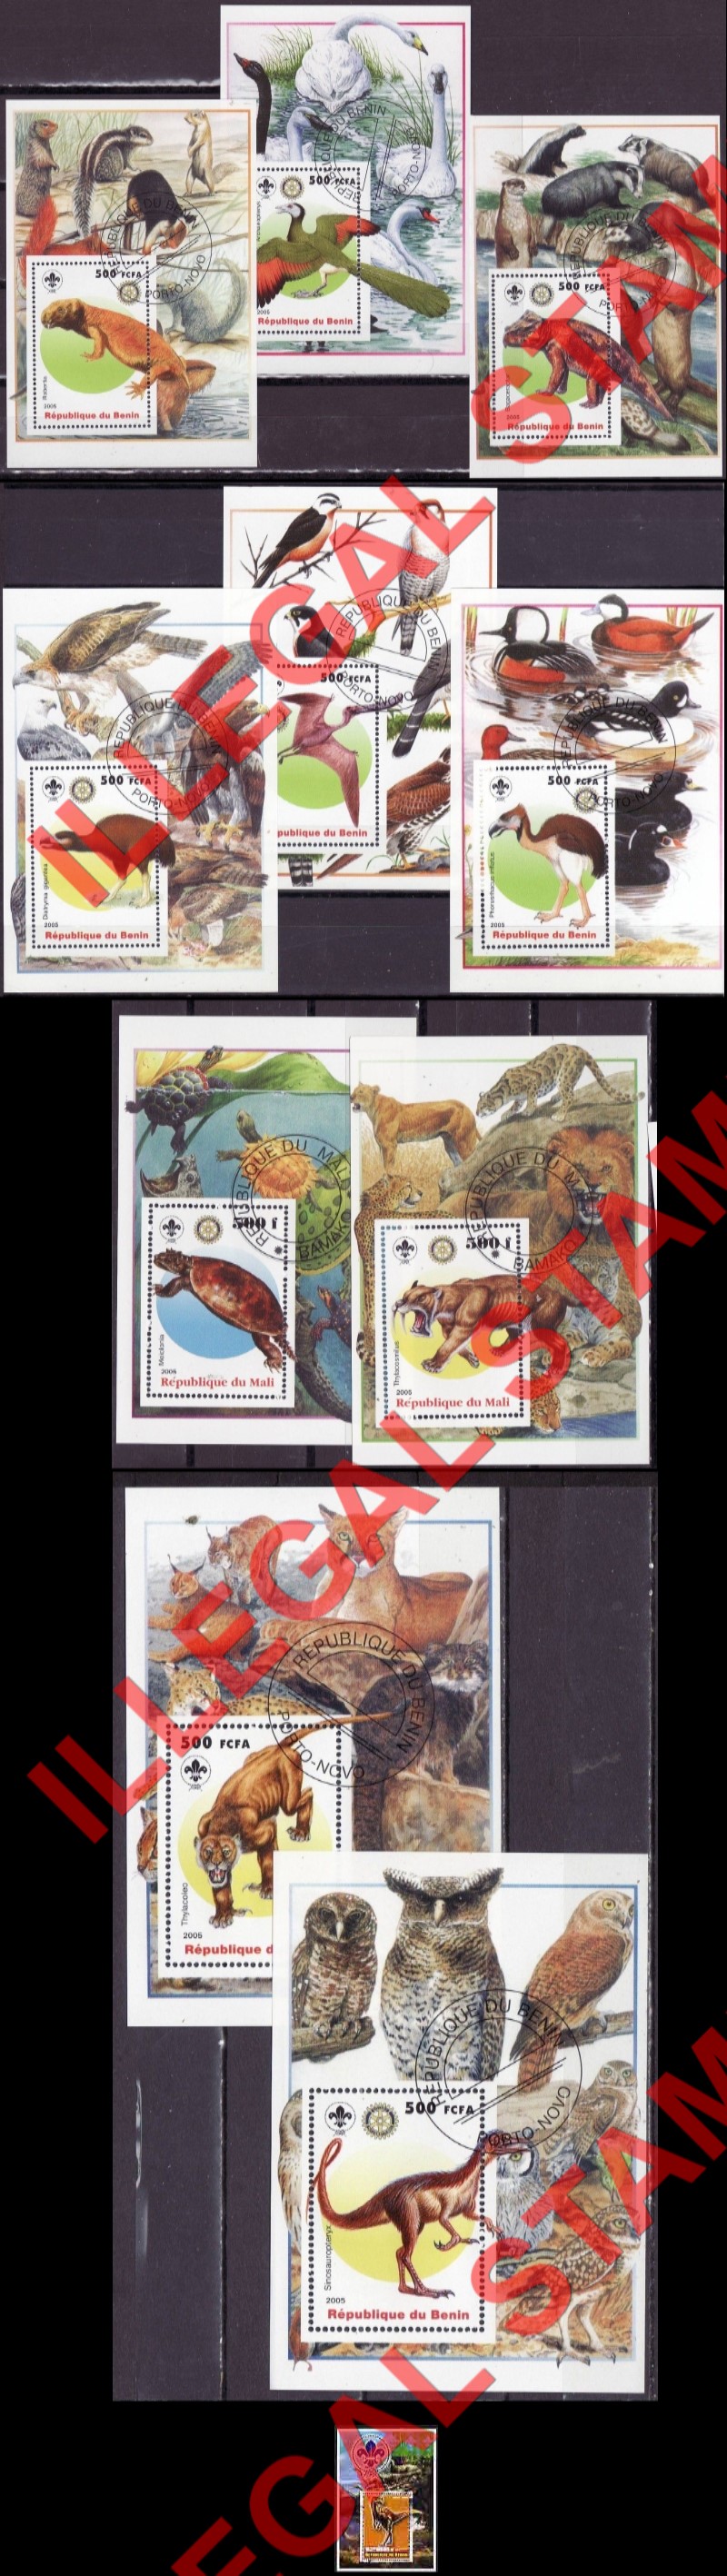 Benin 2005 Dinosaurs and Scouts Logo Illegal Stamp Souvenir Sheets of 1